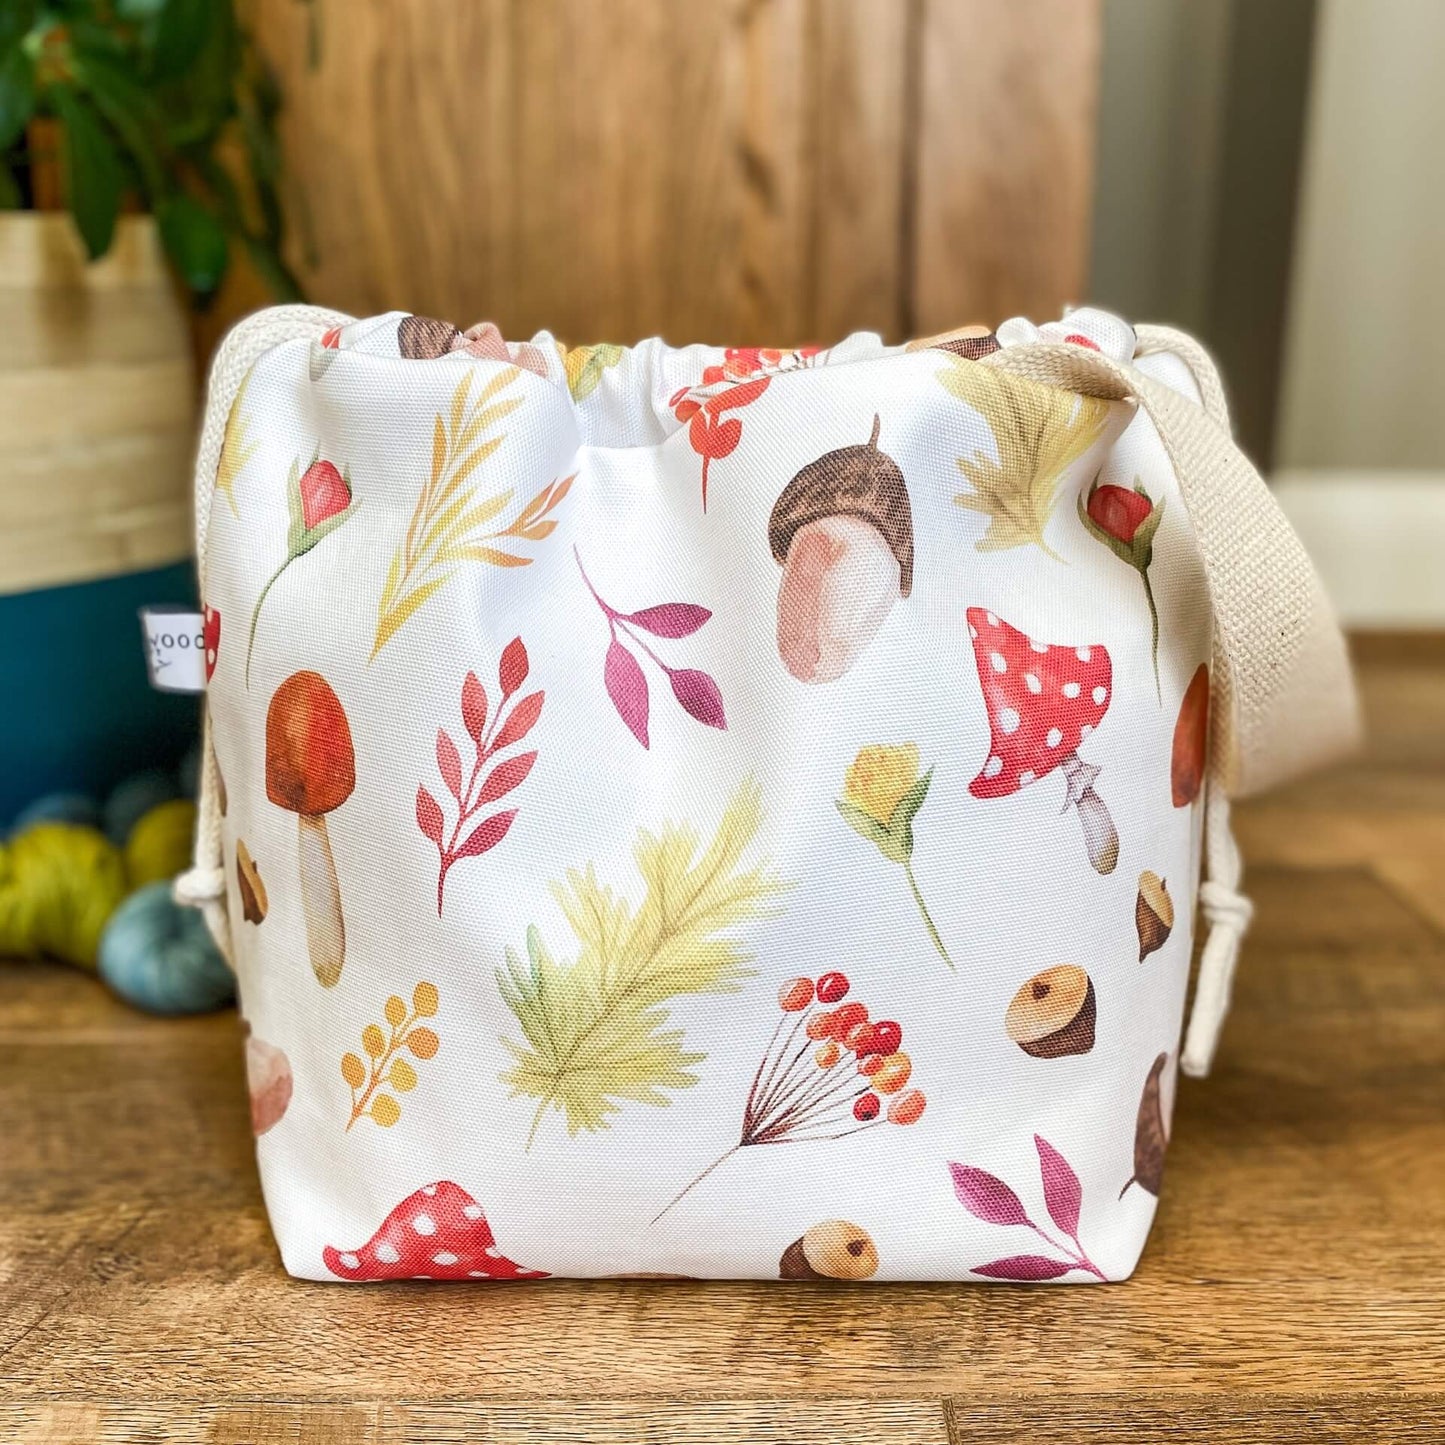 A knitting project bag made using an autumnal print with toadstools and acorns is on the floor next to three skeins of yarn and a houseplant. The bag is pulled closed hiding the contents.